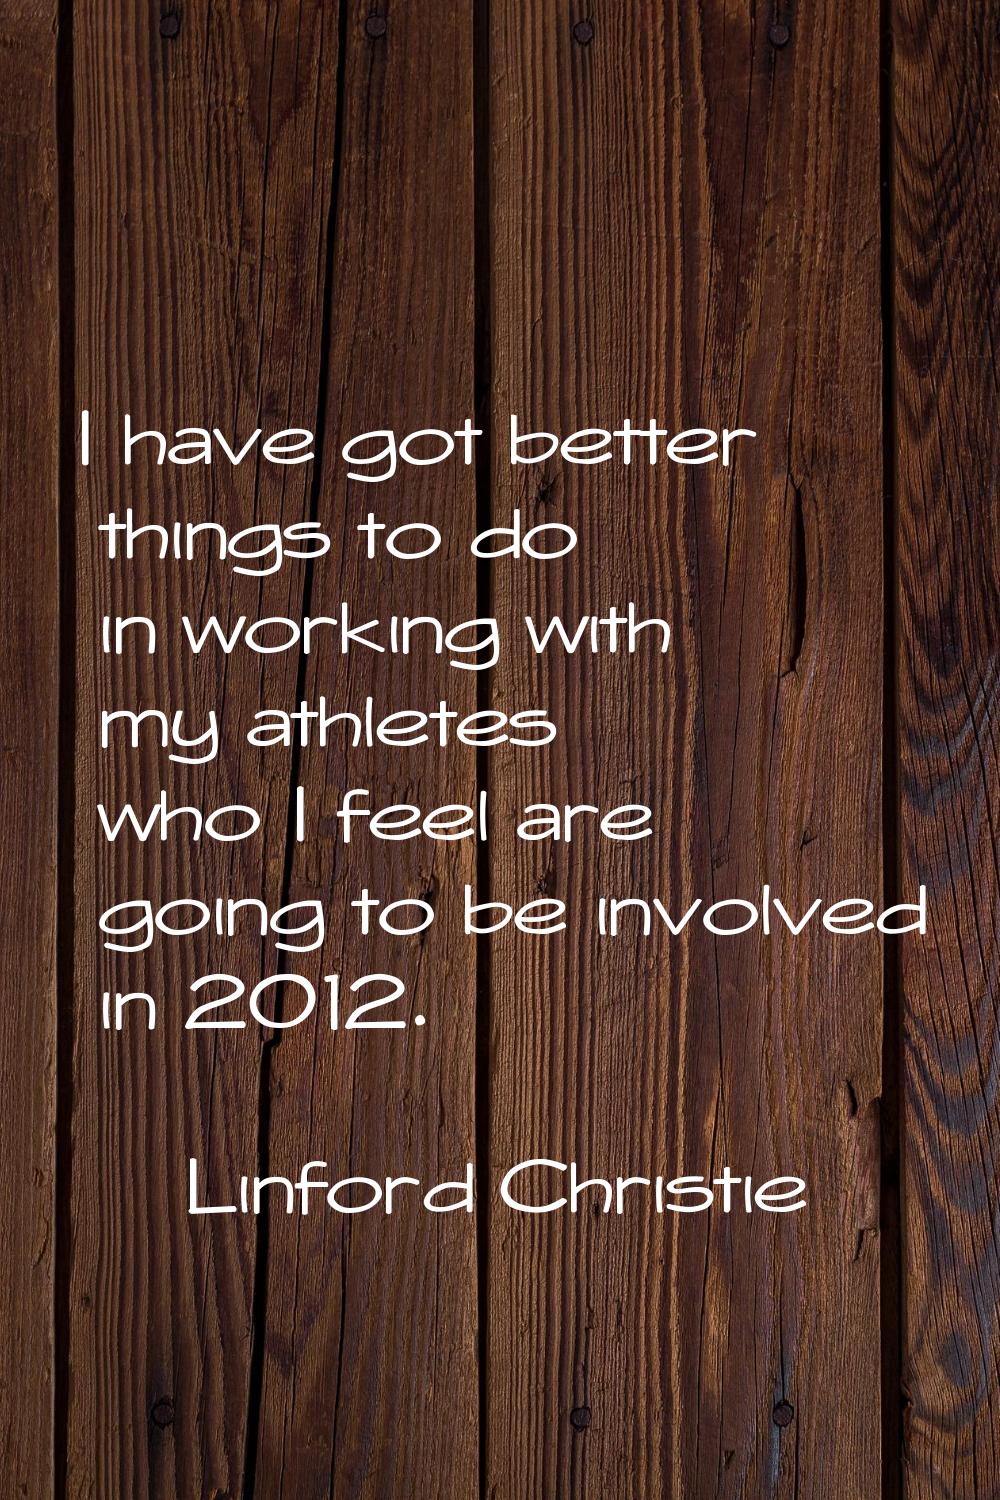 I have got better things to do in working with my athletes who I feel are going to be involved in 2